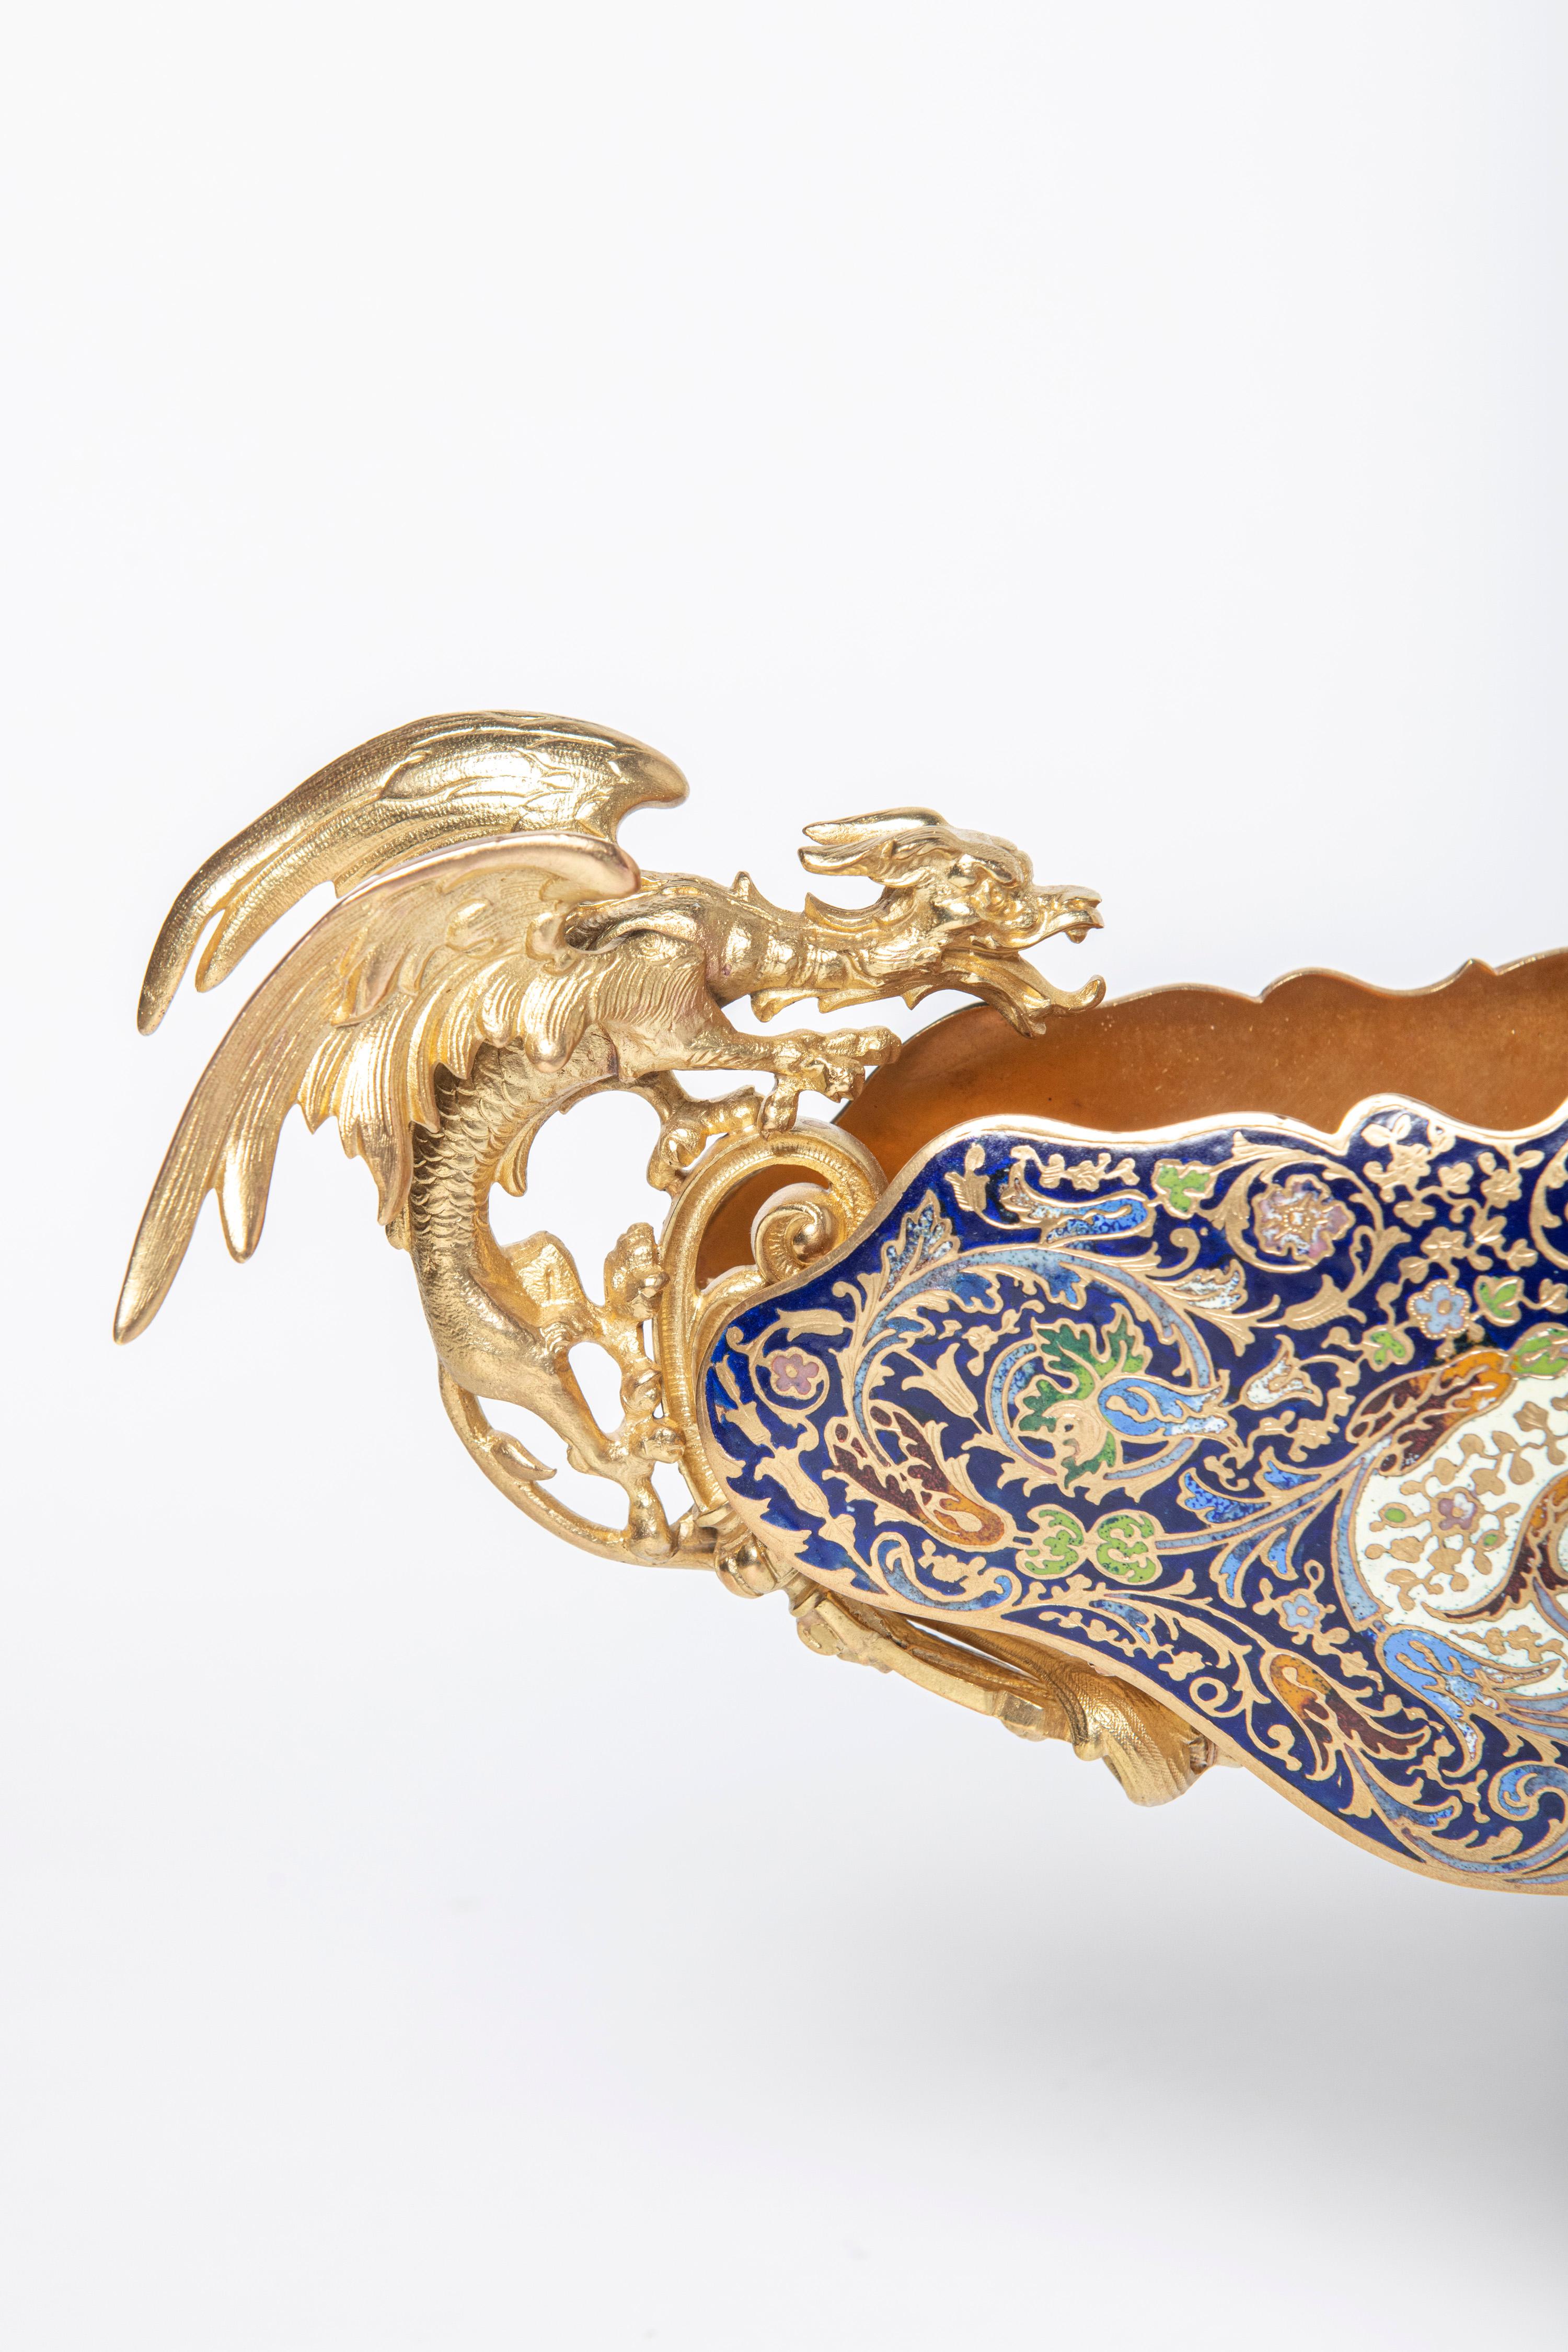 Gilt Enamel and gilt bronze jardiniere. France, late 19th century. For Sale